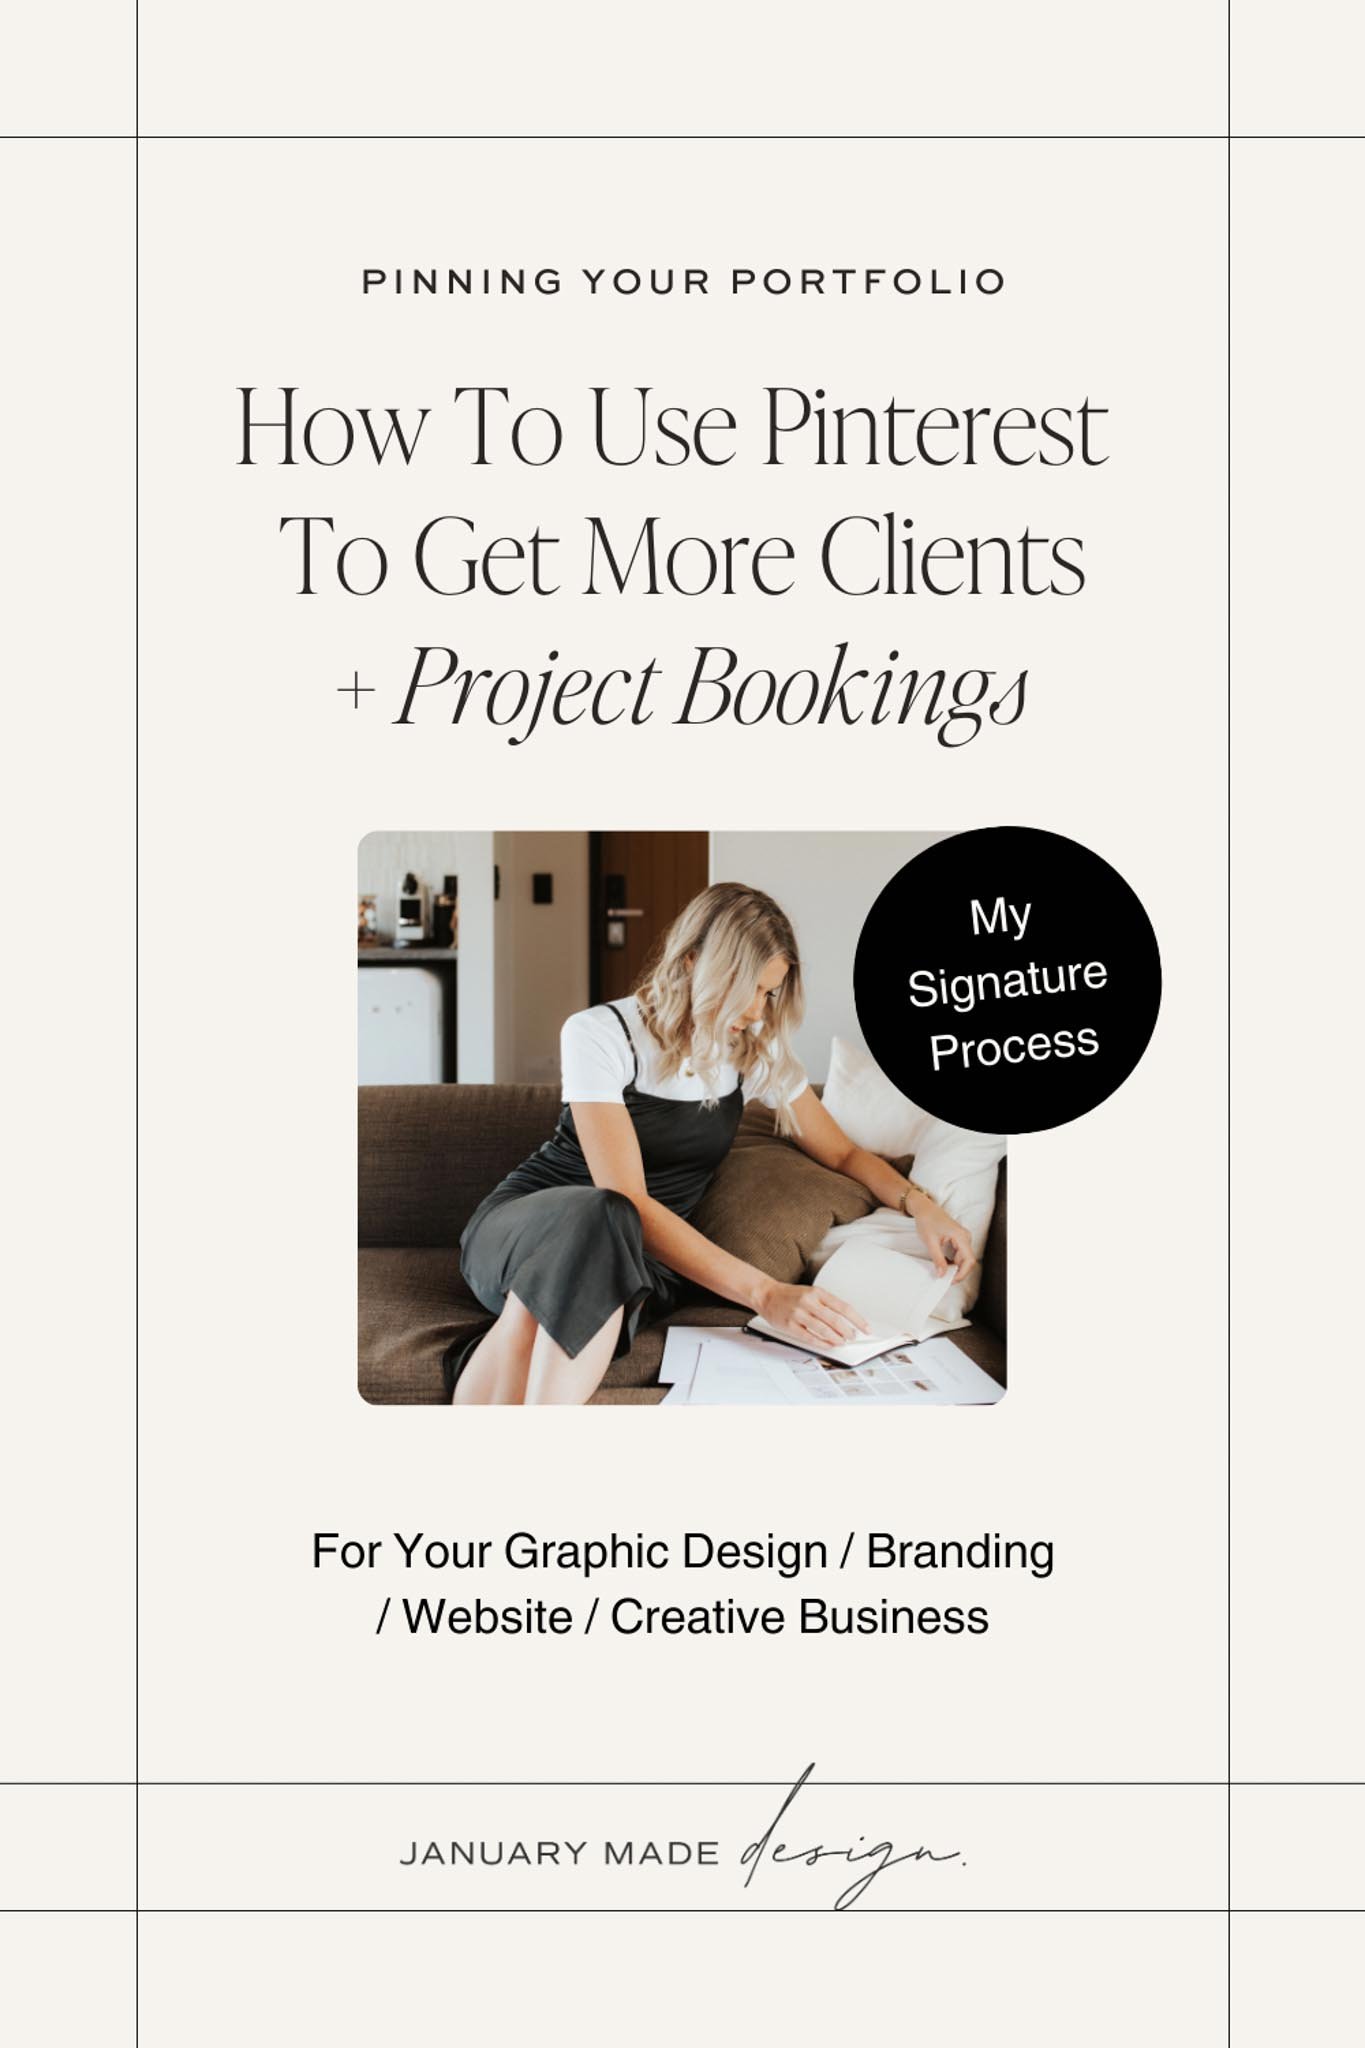 Pinning Your Portfolio_ How To Use Pinterest To Get More Clients & Project Bookings-02.jpg